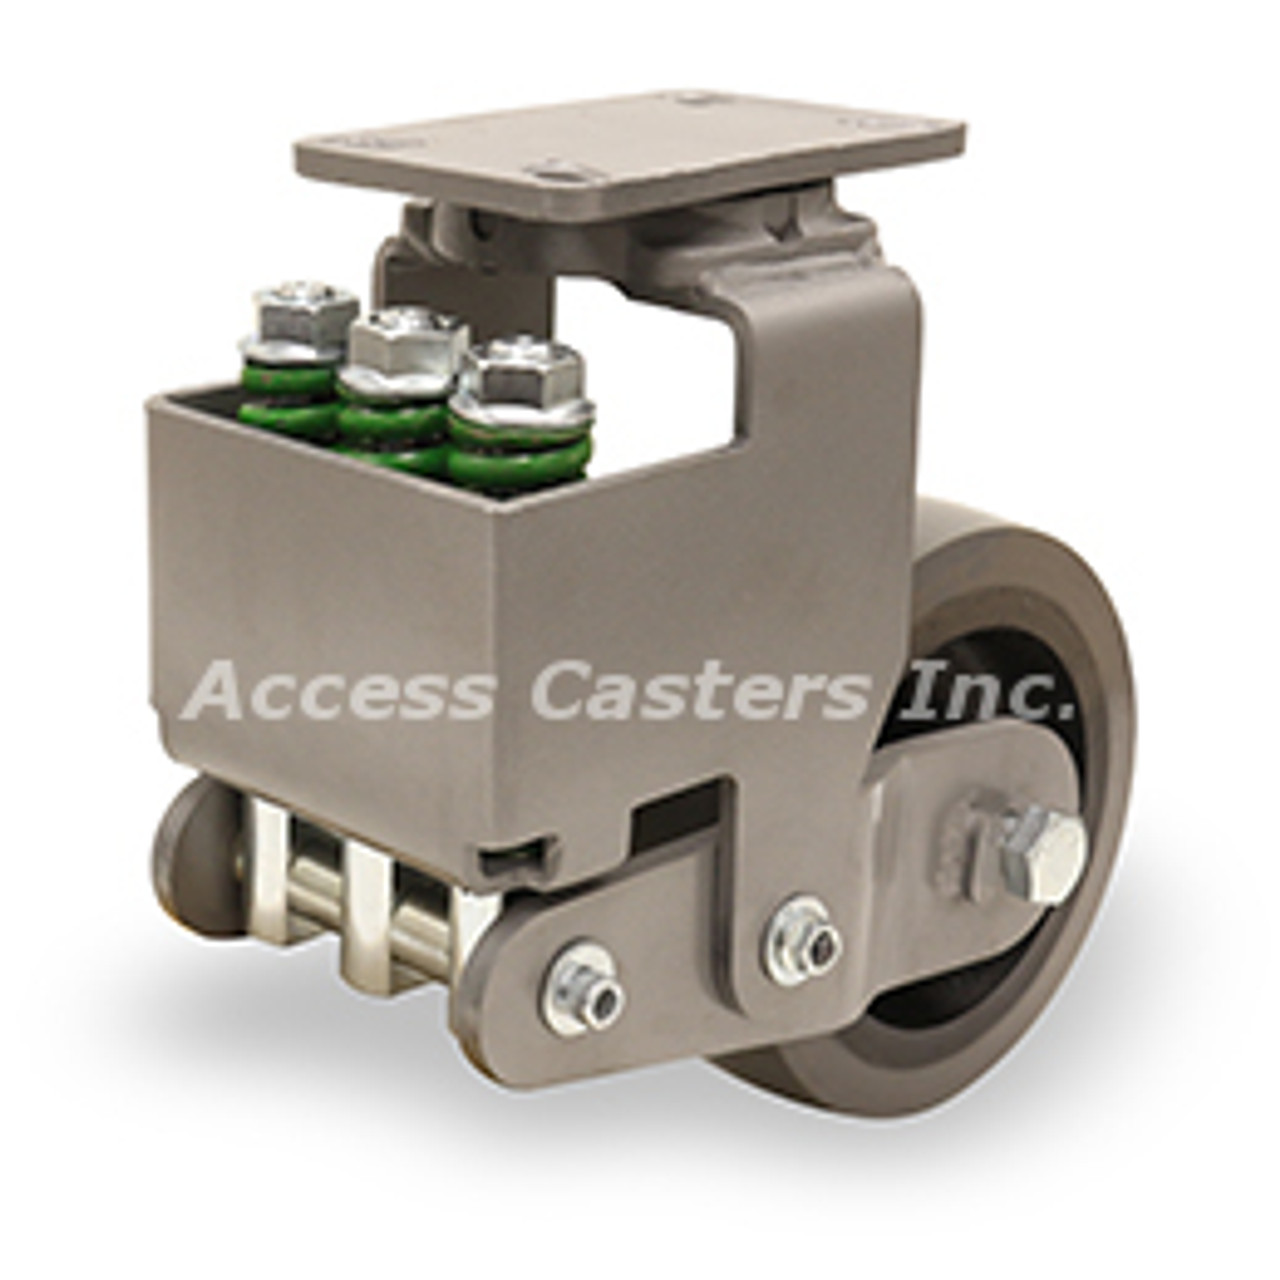 S-AEZFFM-63GB95 Spring loaded caster with 6" x 3" Duraglide wheel